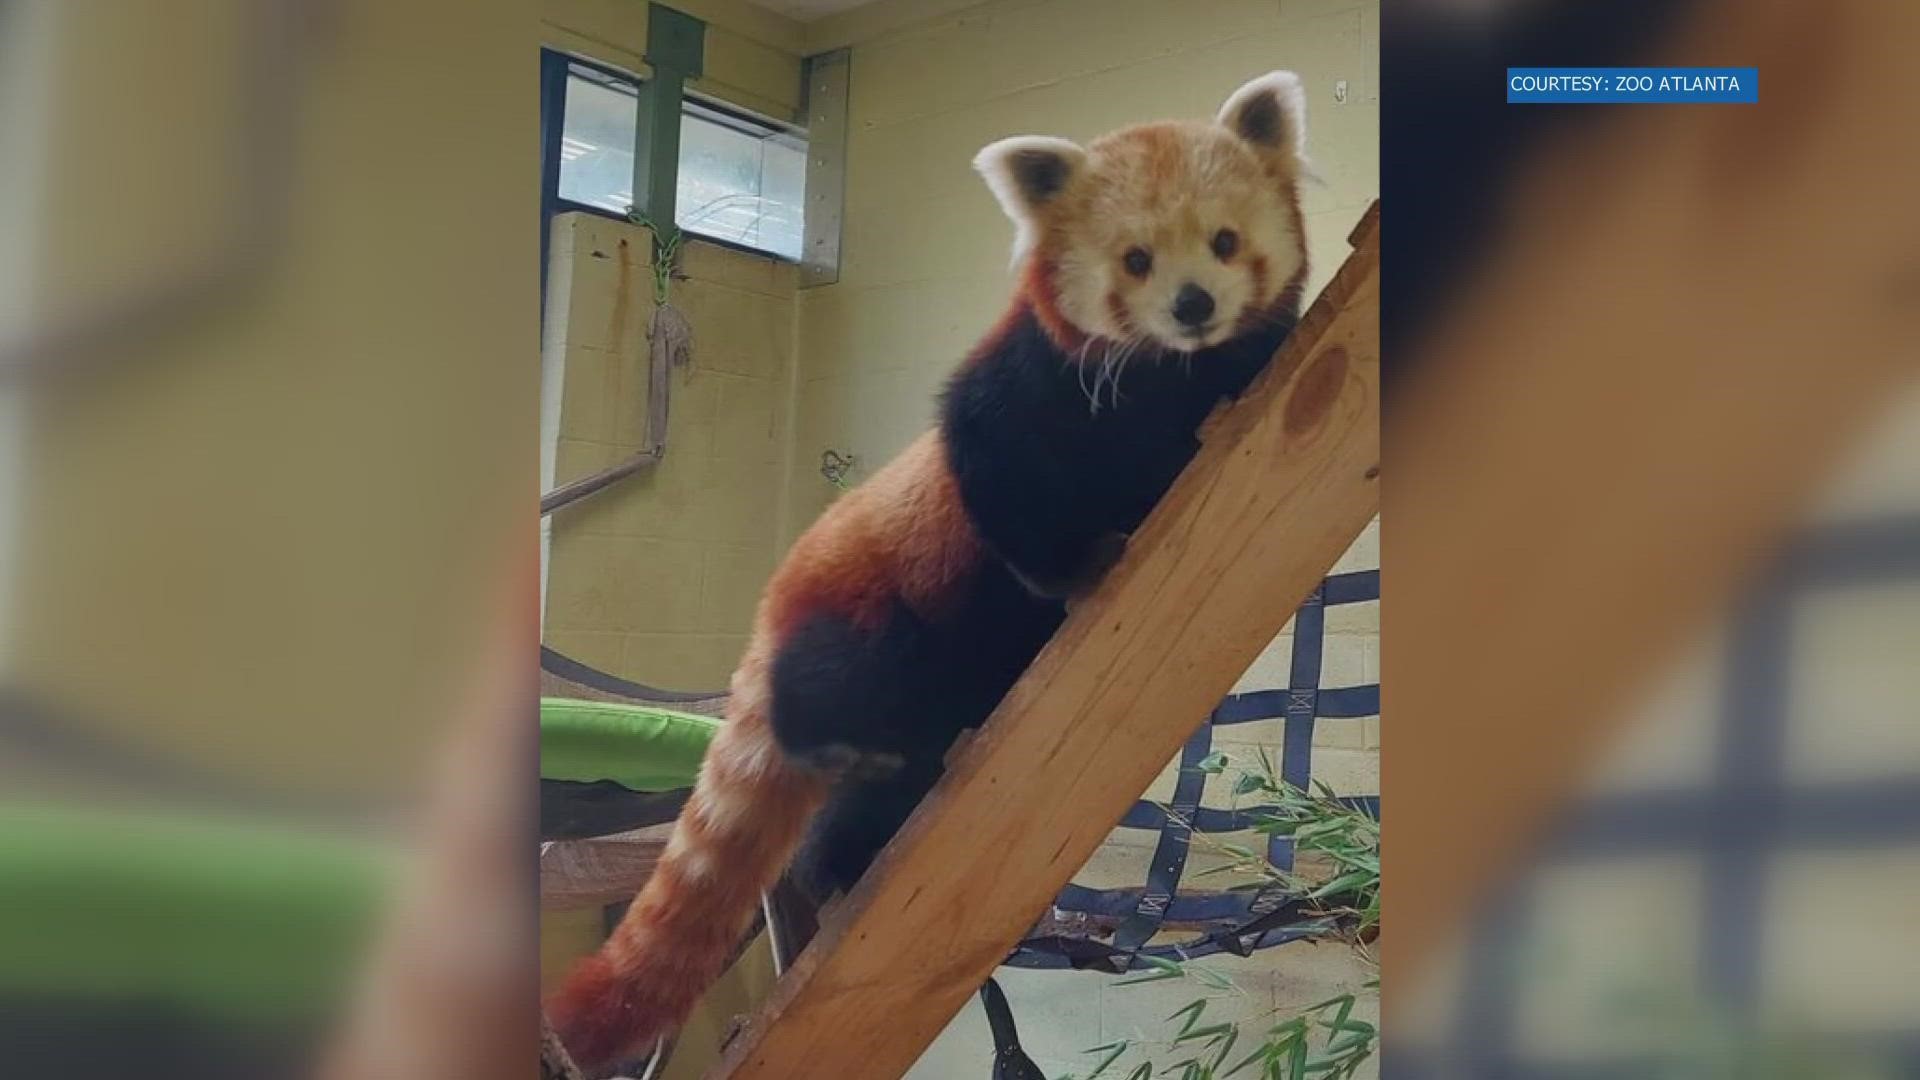 Zoo Knoxville swapped two red panda sisters for a 5-year-old boy red panda in Atlanta. It's all to help conserve and protect the endangered species.